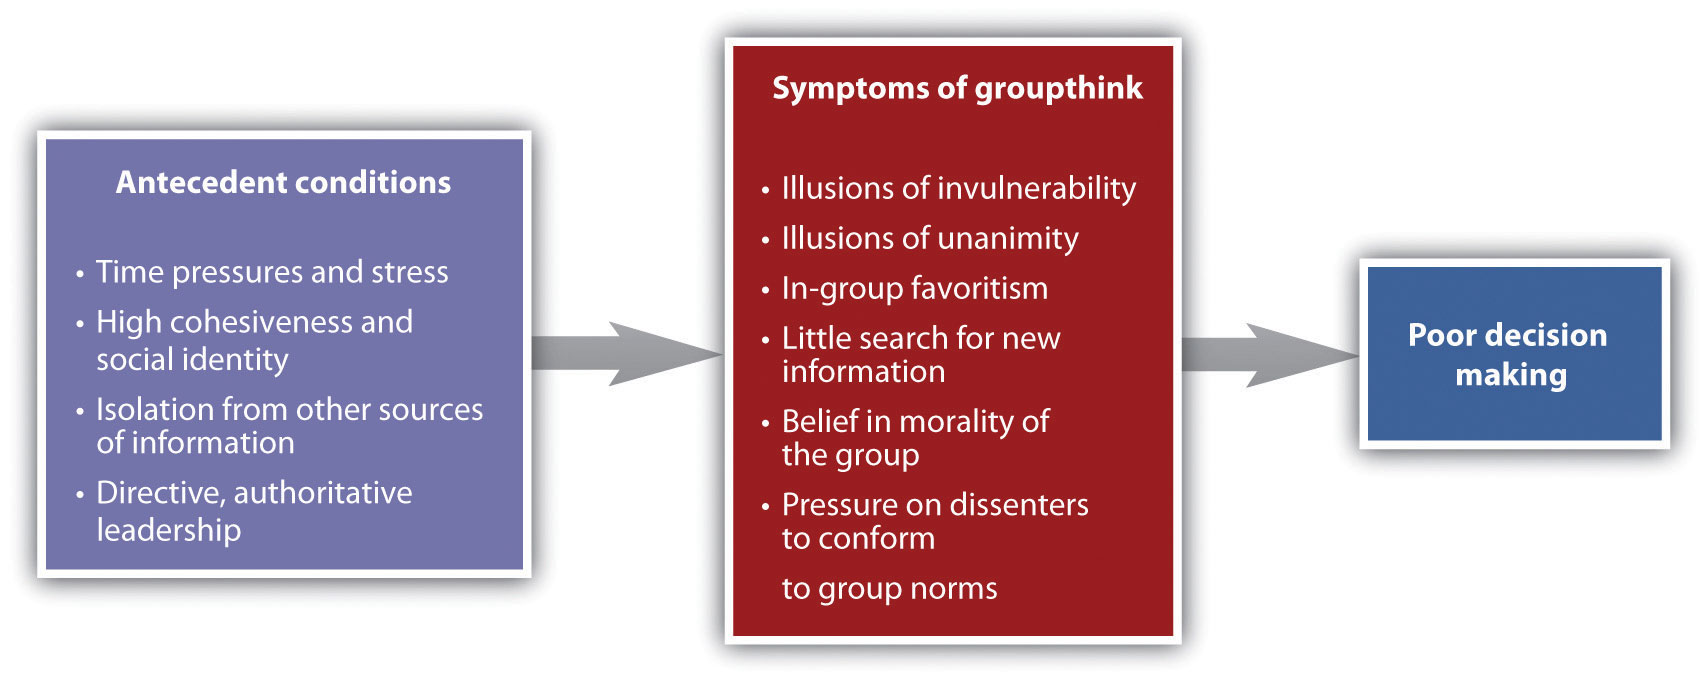 Antecedents and Outcomes of Groupthink: Antecedent conditions (time pressures and stress, high cohesiveness and social identity, isolation from other sources of information, directive, authoritative leadership). Symptoms of groupthink (illusions of invulnerability, illusions of unanimity, in-group favoritism, little search for new information, belief in morality of the group, pressure on dissenters to conform to group norms). Poor decision making